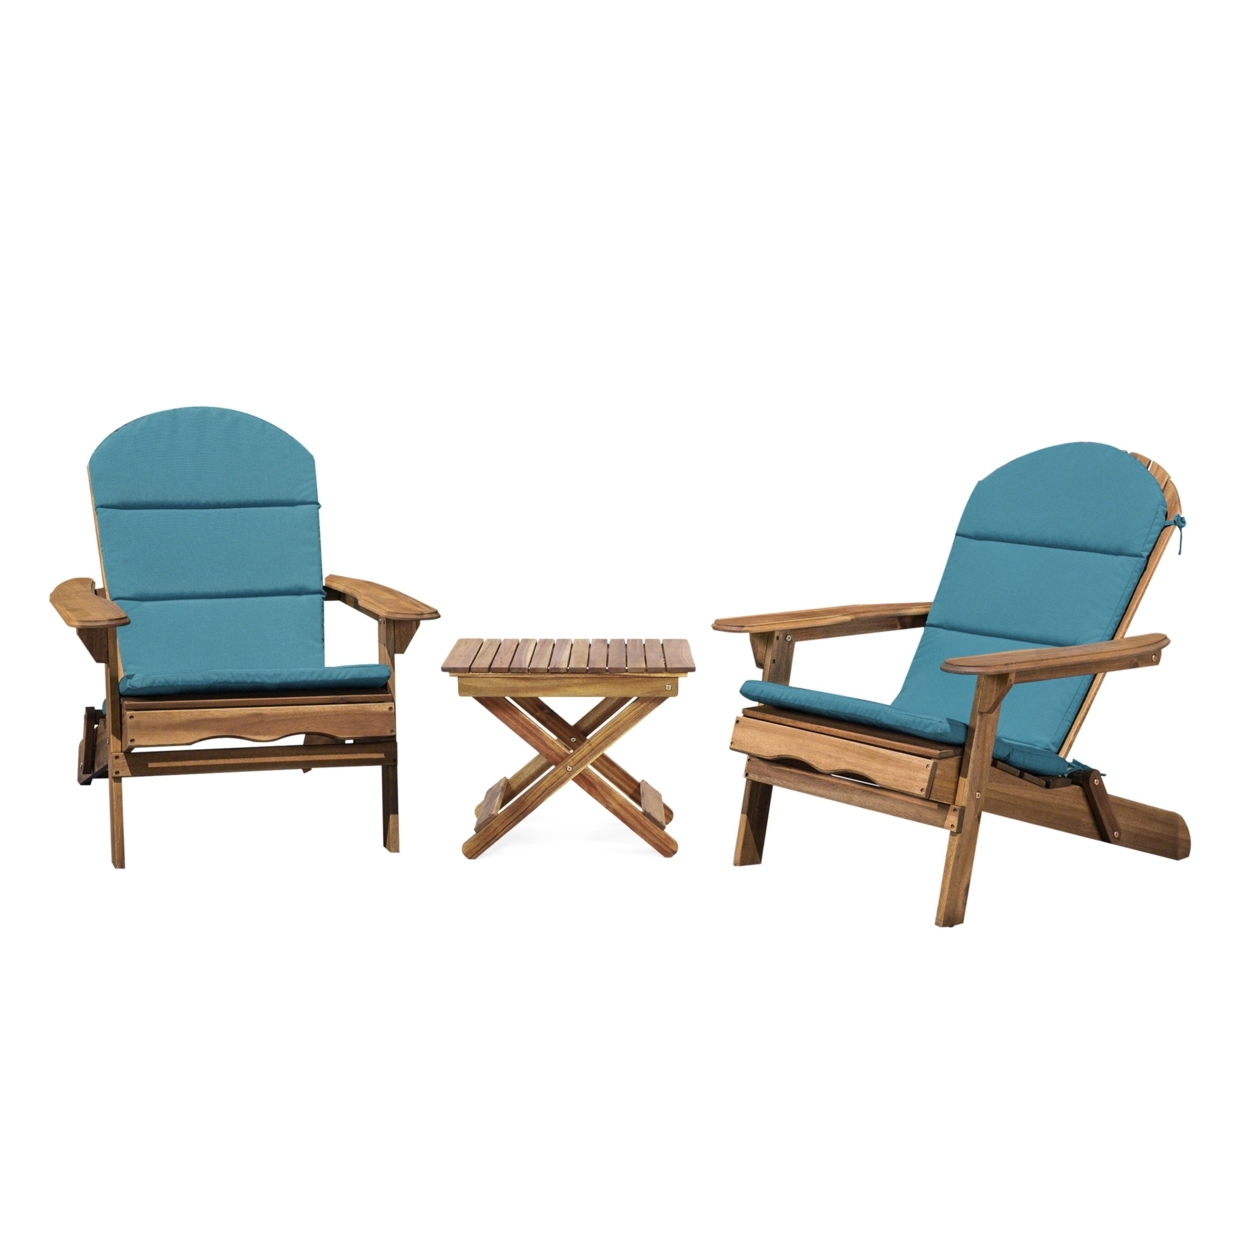 Reed Outdoor 2 Seater Acacia Wood Chat Set With Water Resistant Cushions - Navy Blue/khaki